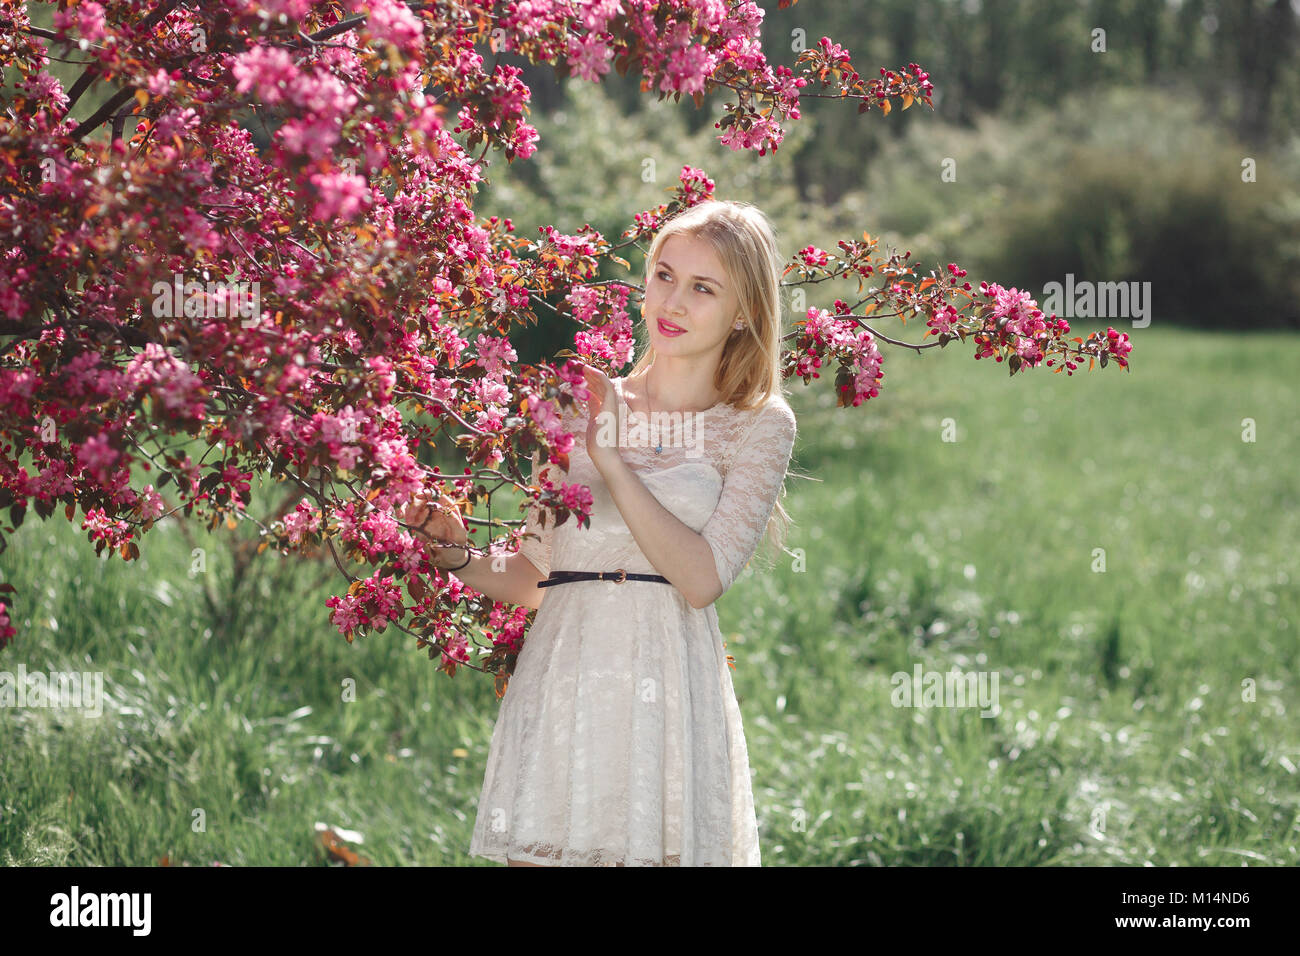 Beautiful young blonde woman enjoying sunny day in park during cherry blossom season on a nice spring day Stock Photo